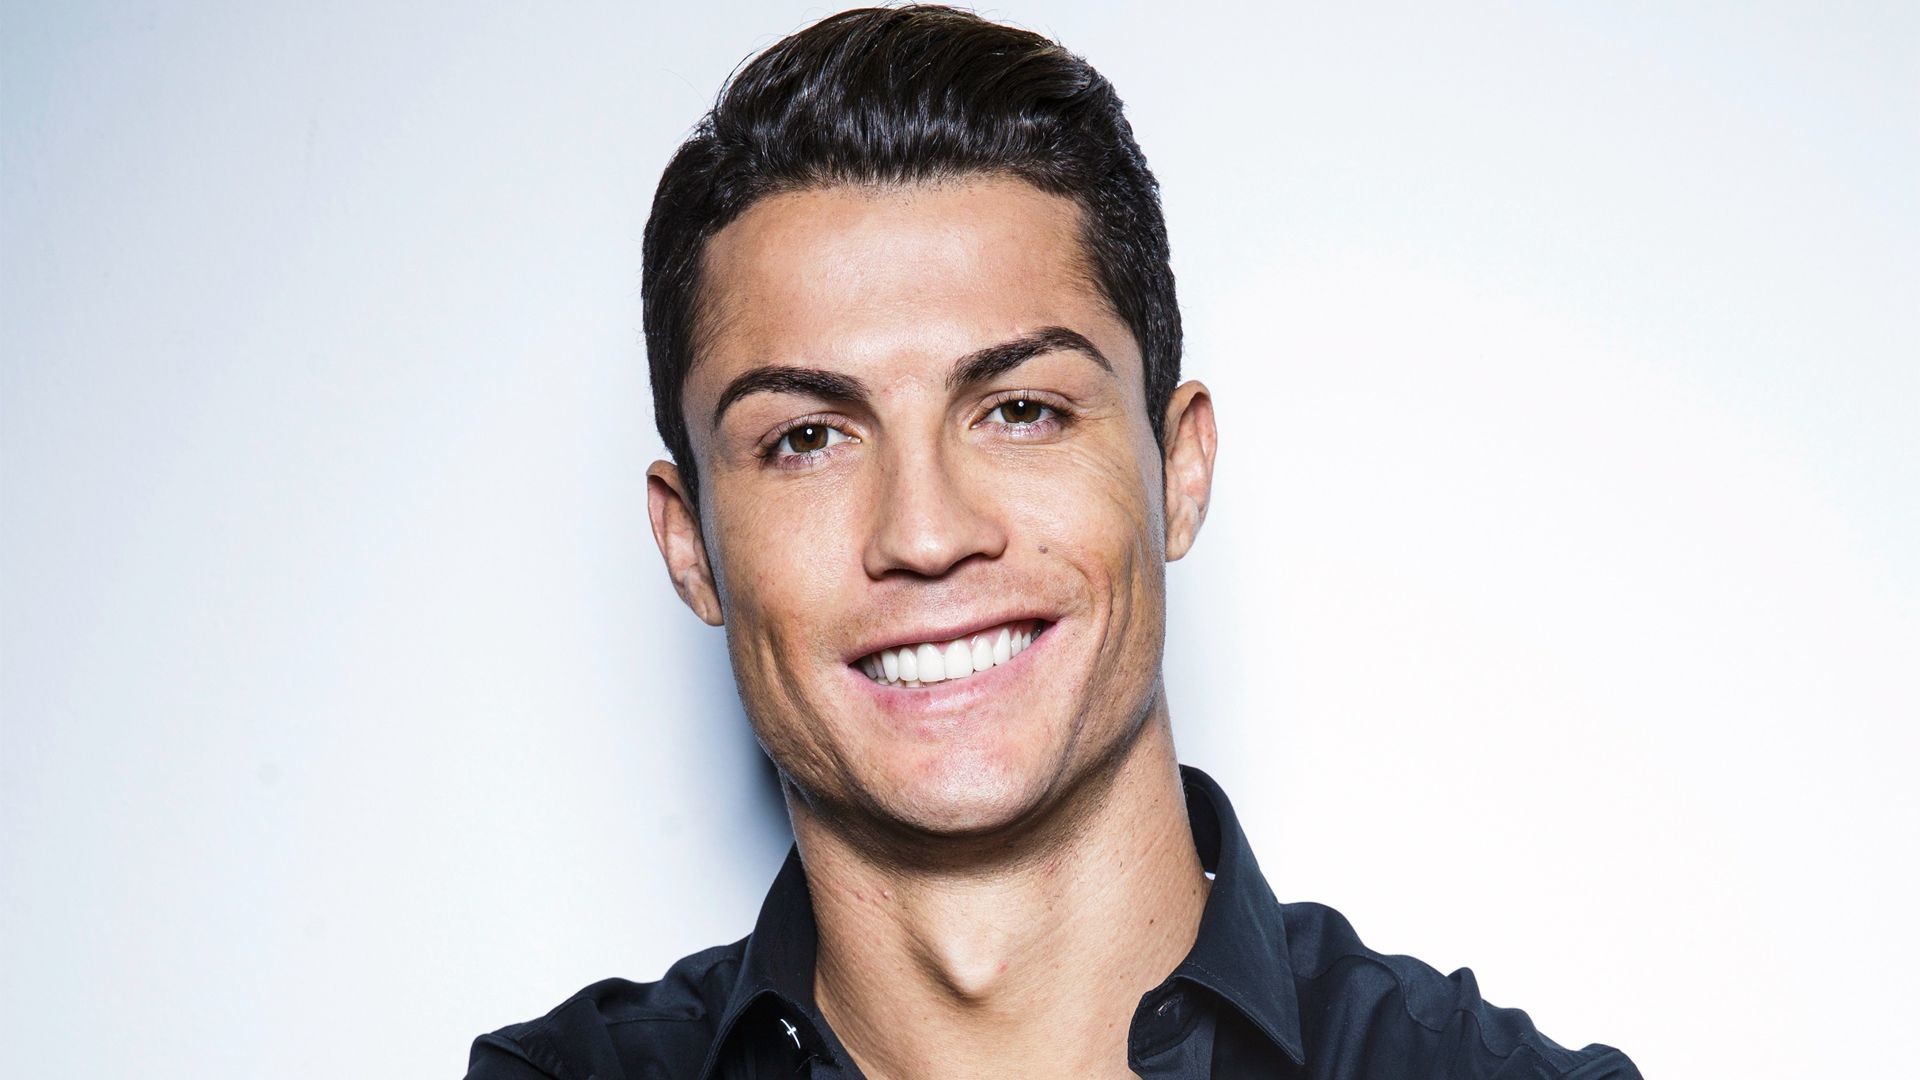 1920x1080 Wallpapers of Cristiano Ronaldo HD for desktop and mobile